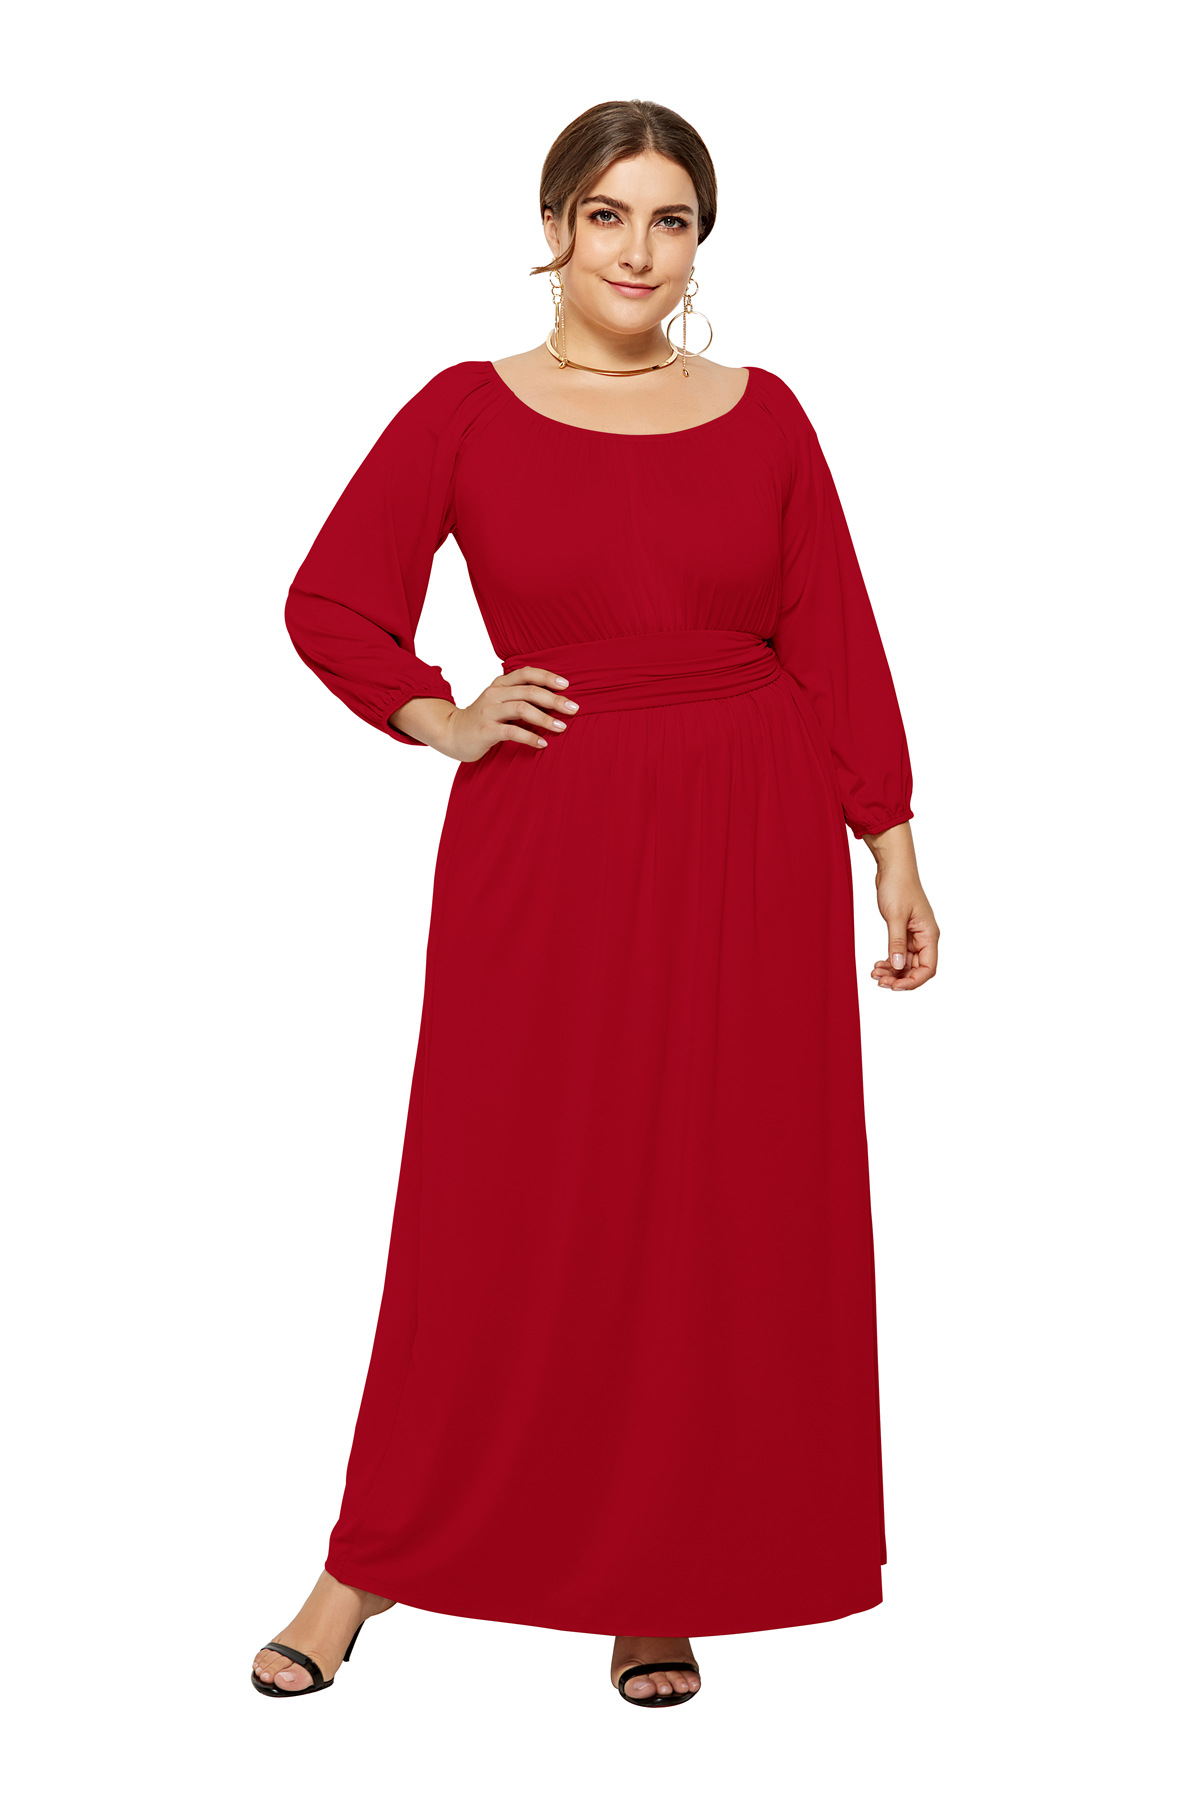  Plus Size Women Maxi Dress High Waist Long Sleeve Solid Loose Formal Party Long Dress red